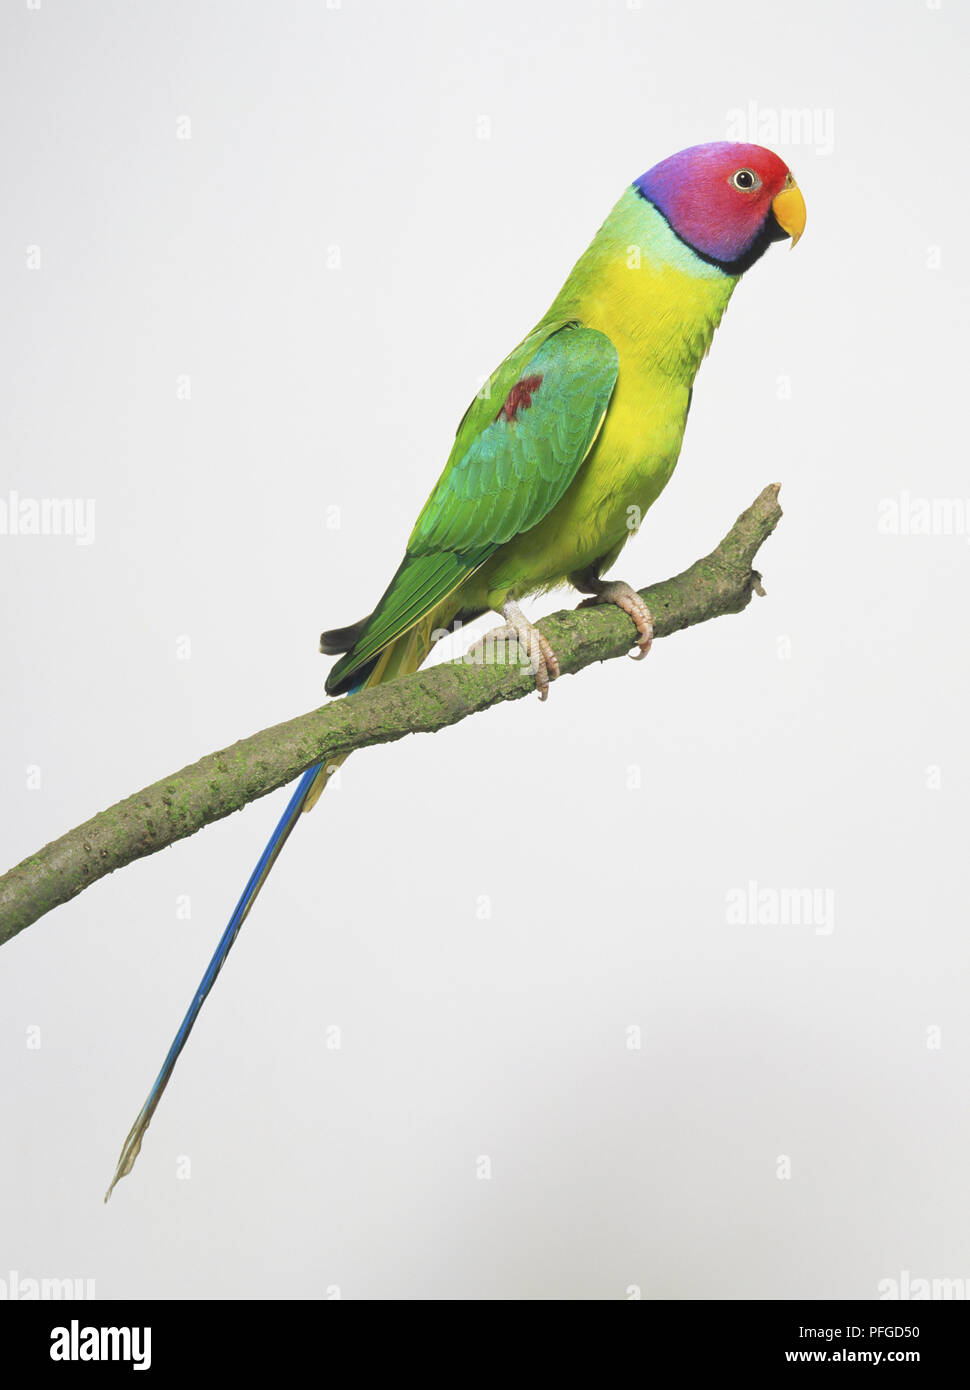 Plum-headed Parakeet (Psittacula cyanocephala) perched on branch, side view Stock Photo